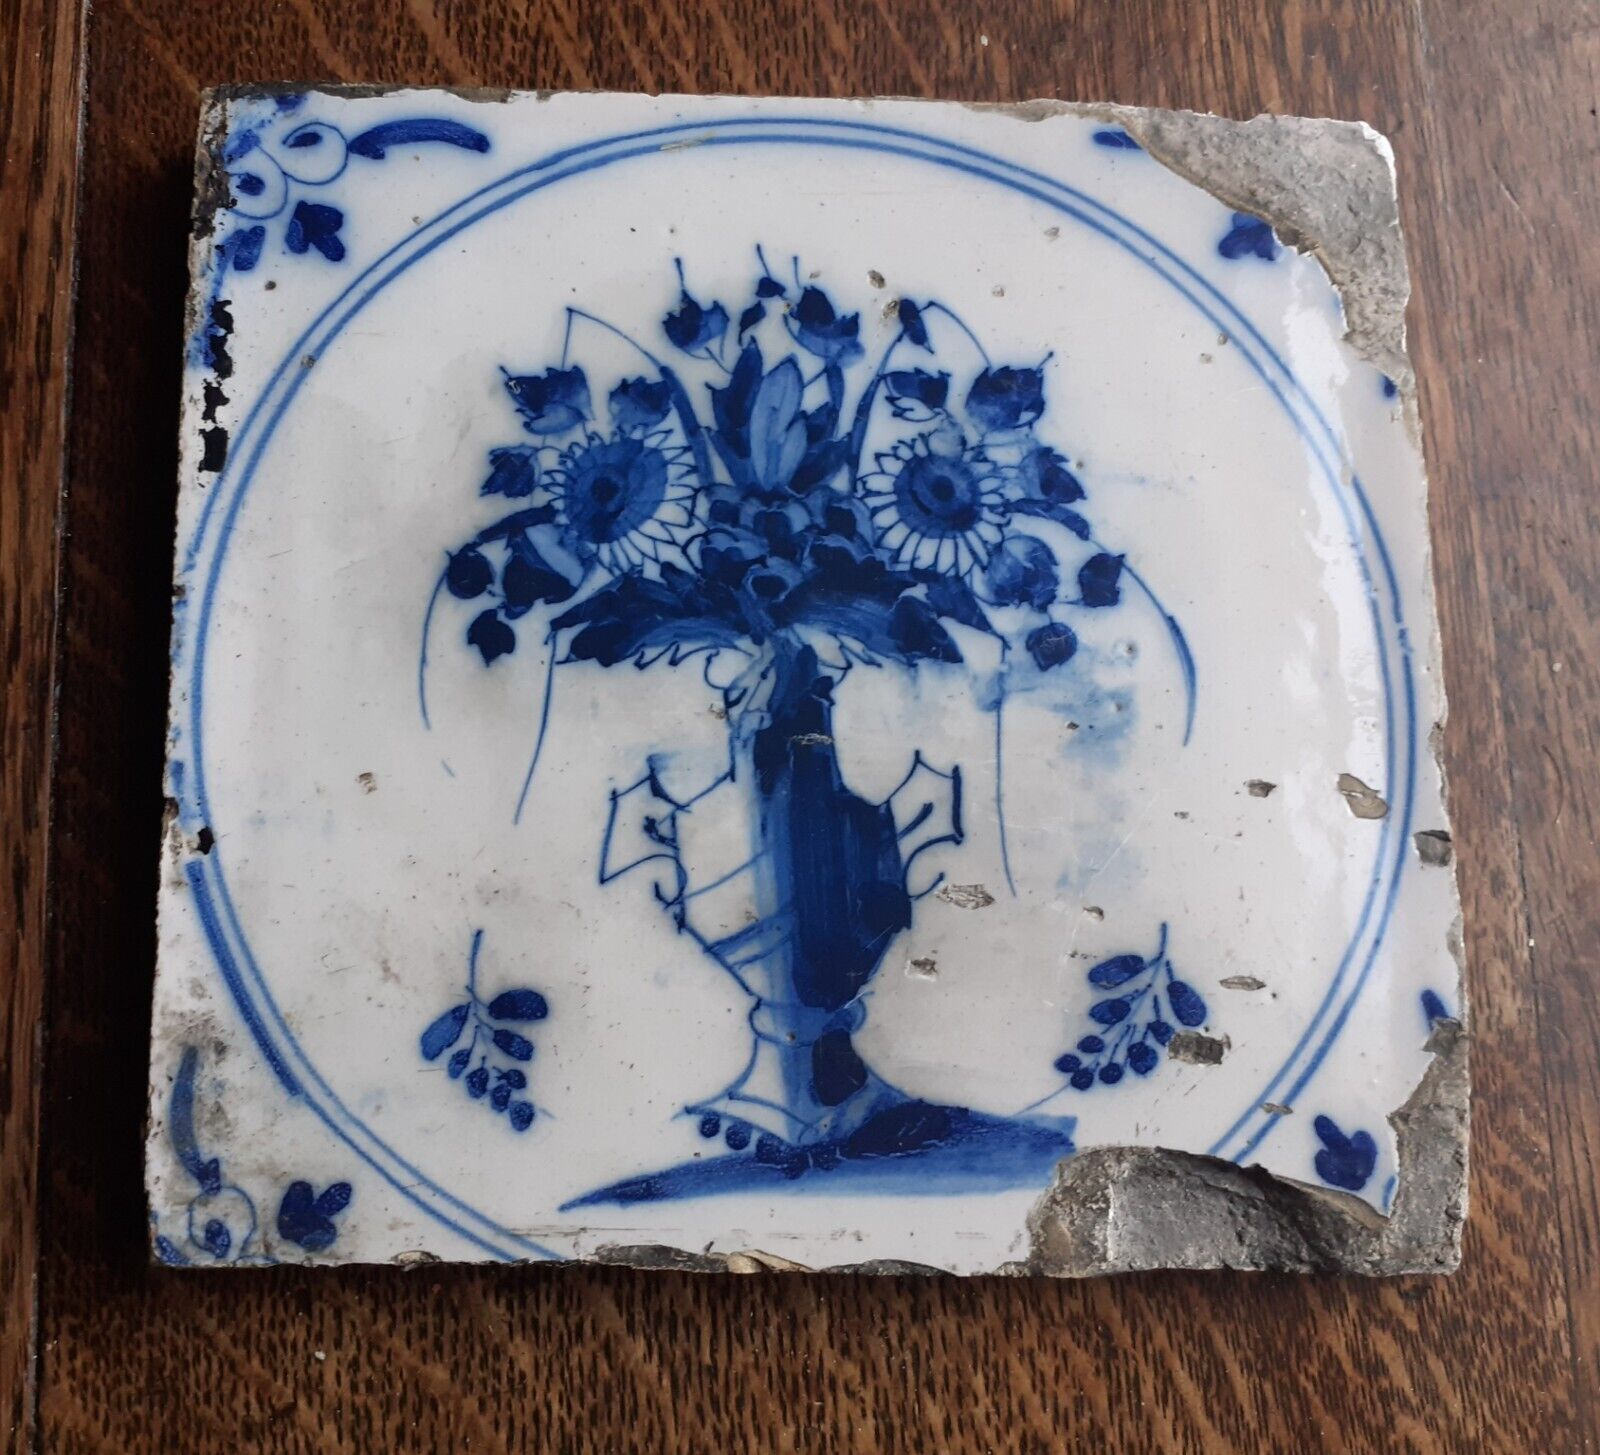 Blue Delft Tile. 18C. 7 inches square. Damage as seen.